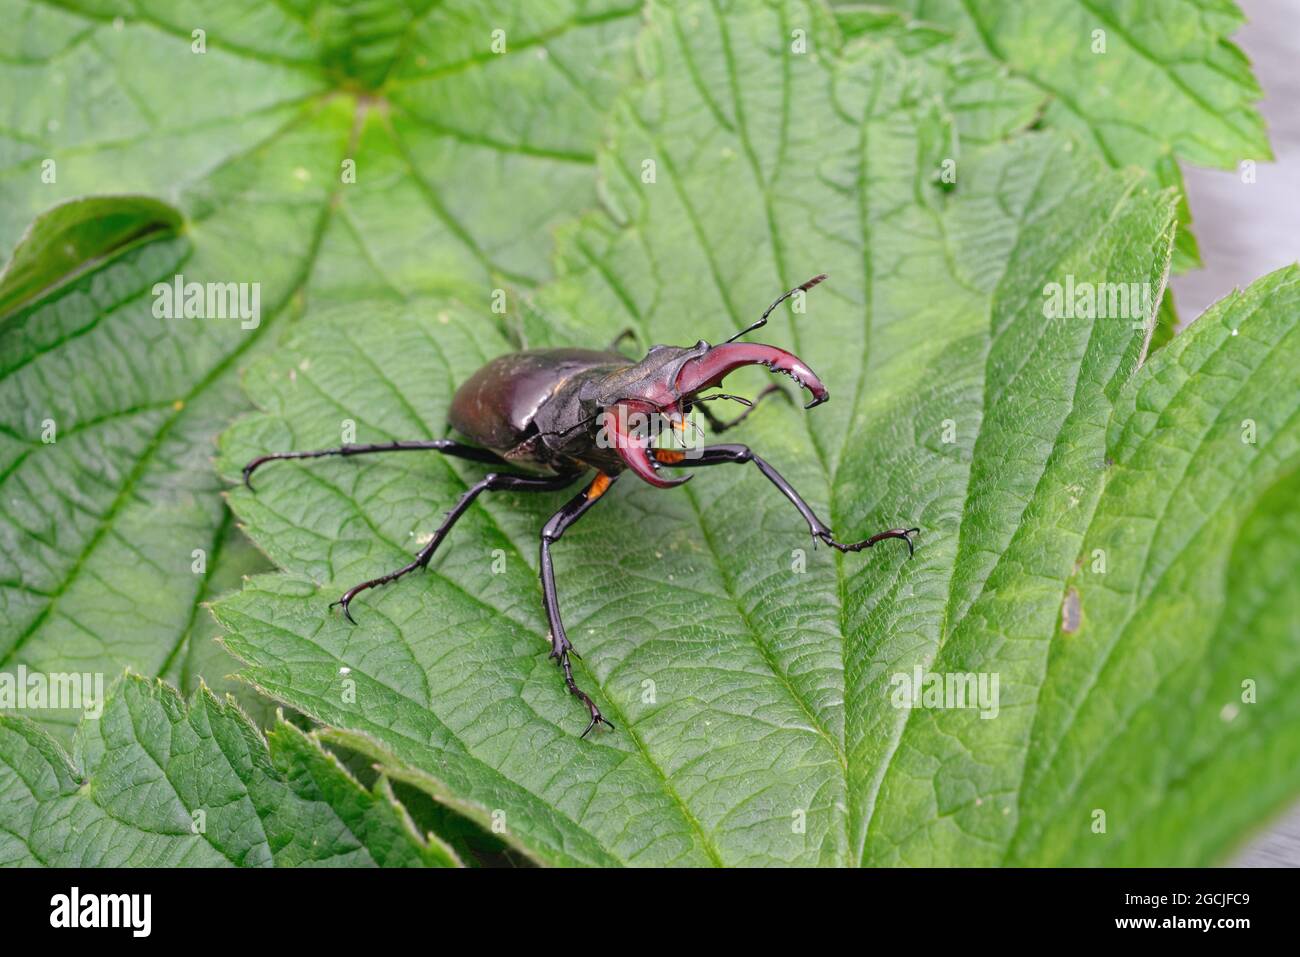 Close up of a Stag beetle Lucanus cervus, on a green leaf Stock Photo